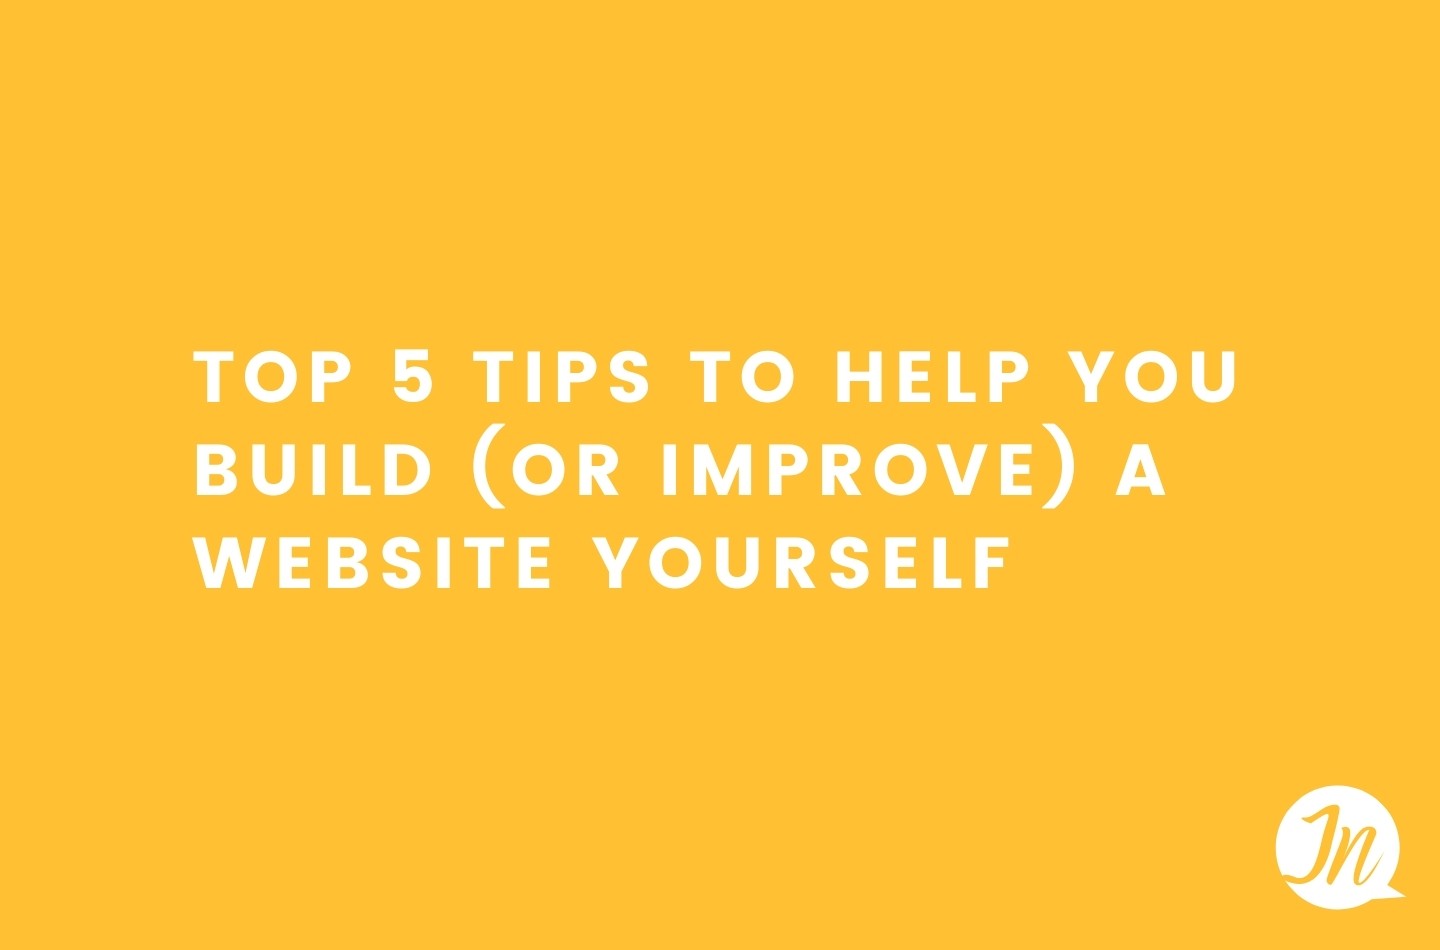 Top 5 tips to help you build a website yourself